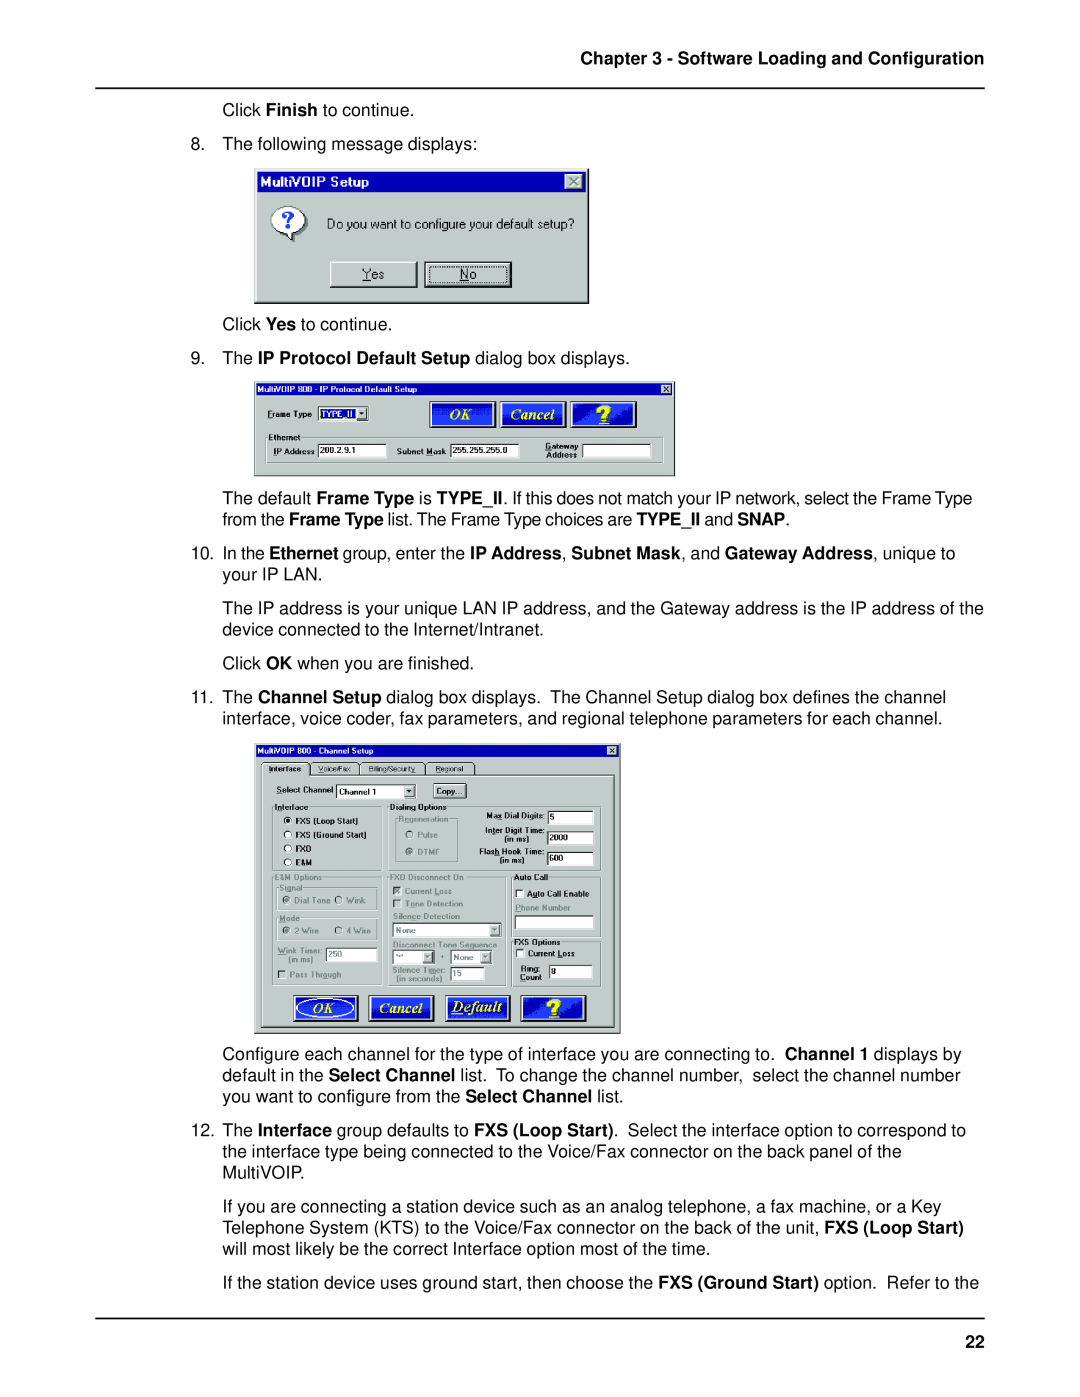 Multi-Tech Systems MVP 800 manual The IP Protocol Default Setup dialog box displays, Software Loading and Configuration 